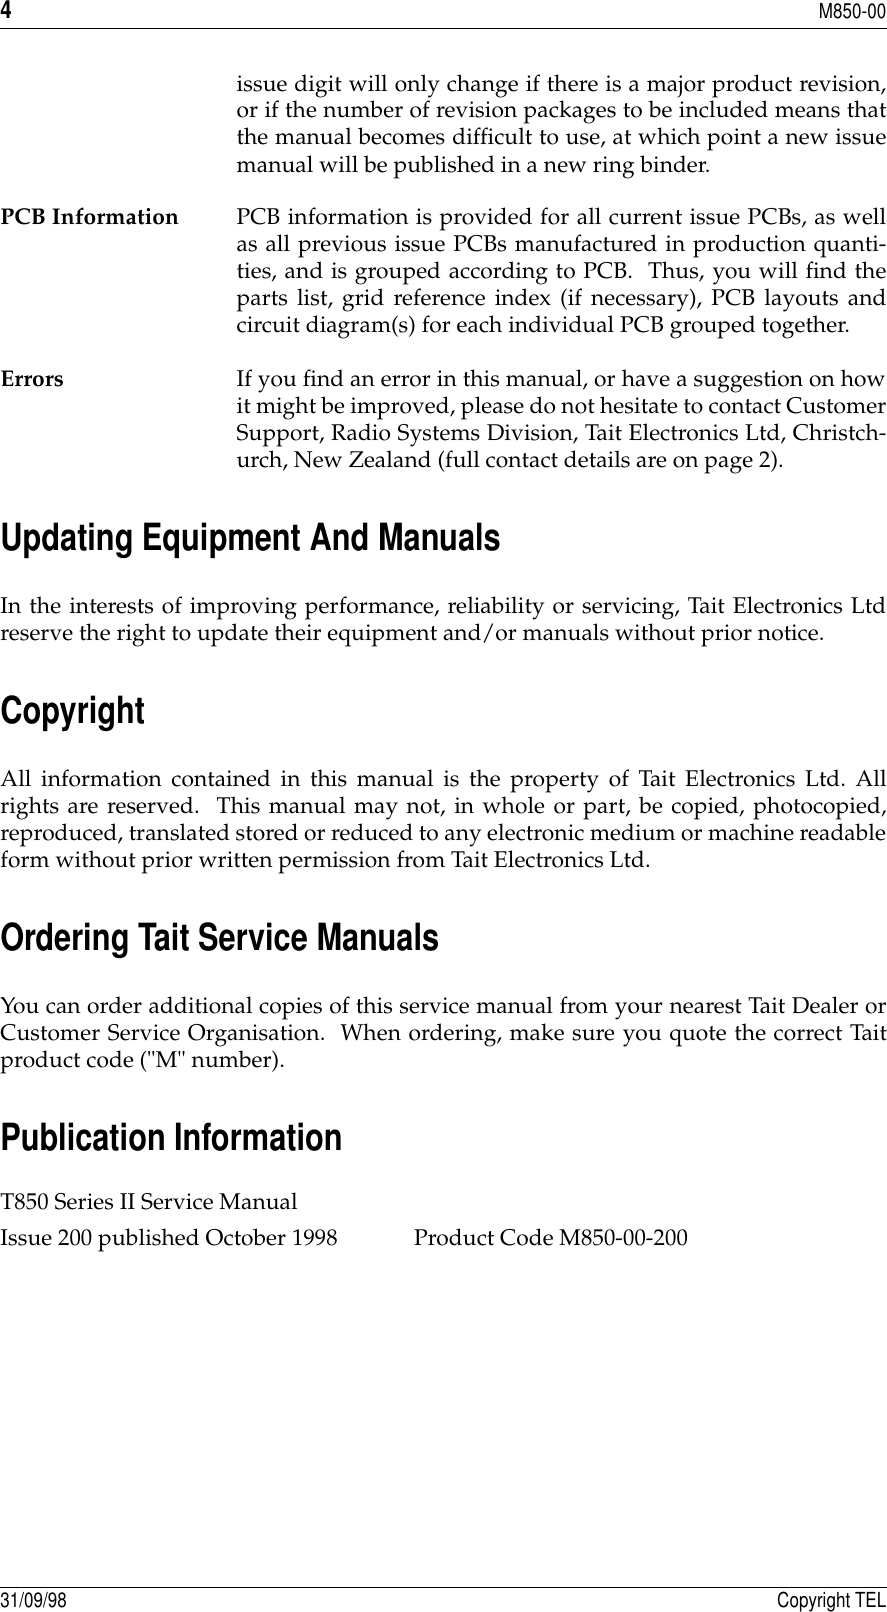 4M850-0031/09/98 Copyright TELissue digit will only change if there is a major product revision,or if the number of revision packages to be included means thatthe manual becomes difficult to use, at which point a new issuemanual will be published in a new ring binder.PCB Information PCB information is provided for all current issue PCBs, as wellas all previous issue PCBs manufactured in production quanti-ties, and is grouped according to PCB.  Thus, you will find theparts list, grid reference index (if necessary), PCB layouts andcircuit diagram(s) for each individual PCB grouped together.Errors If you find an error in this manual, or have a suggestion on howit might be improved, please do not hesitate to contact CustomerSupport, Radio Systems Division, Tait Electronics Ltd, Christch-urch, New Zealand (full contact details are on page 2).Updating Equipment And ManualsIn the interests of improving performance, reliability or servicing, Tait Electronics Ltdreserve the right to update their equipment and/or manuals without prior notice.CopyrightAll information contained in this manual is the property of Tait Electronics Ltd. Allrights are reserved.  This manual may not, in whole or part, be copied, photocopied,reproduced, translated stored or reduced to any electronic medium or machine readableform without prior written permission from Tait Electronics Ltd.Ordering Tait Service ManualsYou can order additional copies of this service manual from your nearest Tait Dealer orCustomer Service Organisation.  When ordering, make sure you quote the correct Taitproduct code (&quot;M&quot; number).Publication InformationT850 Series II Service Manual Issue 200 published October 1998 Product Code M850-00-200